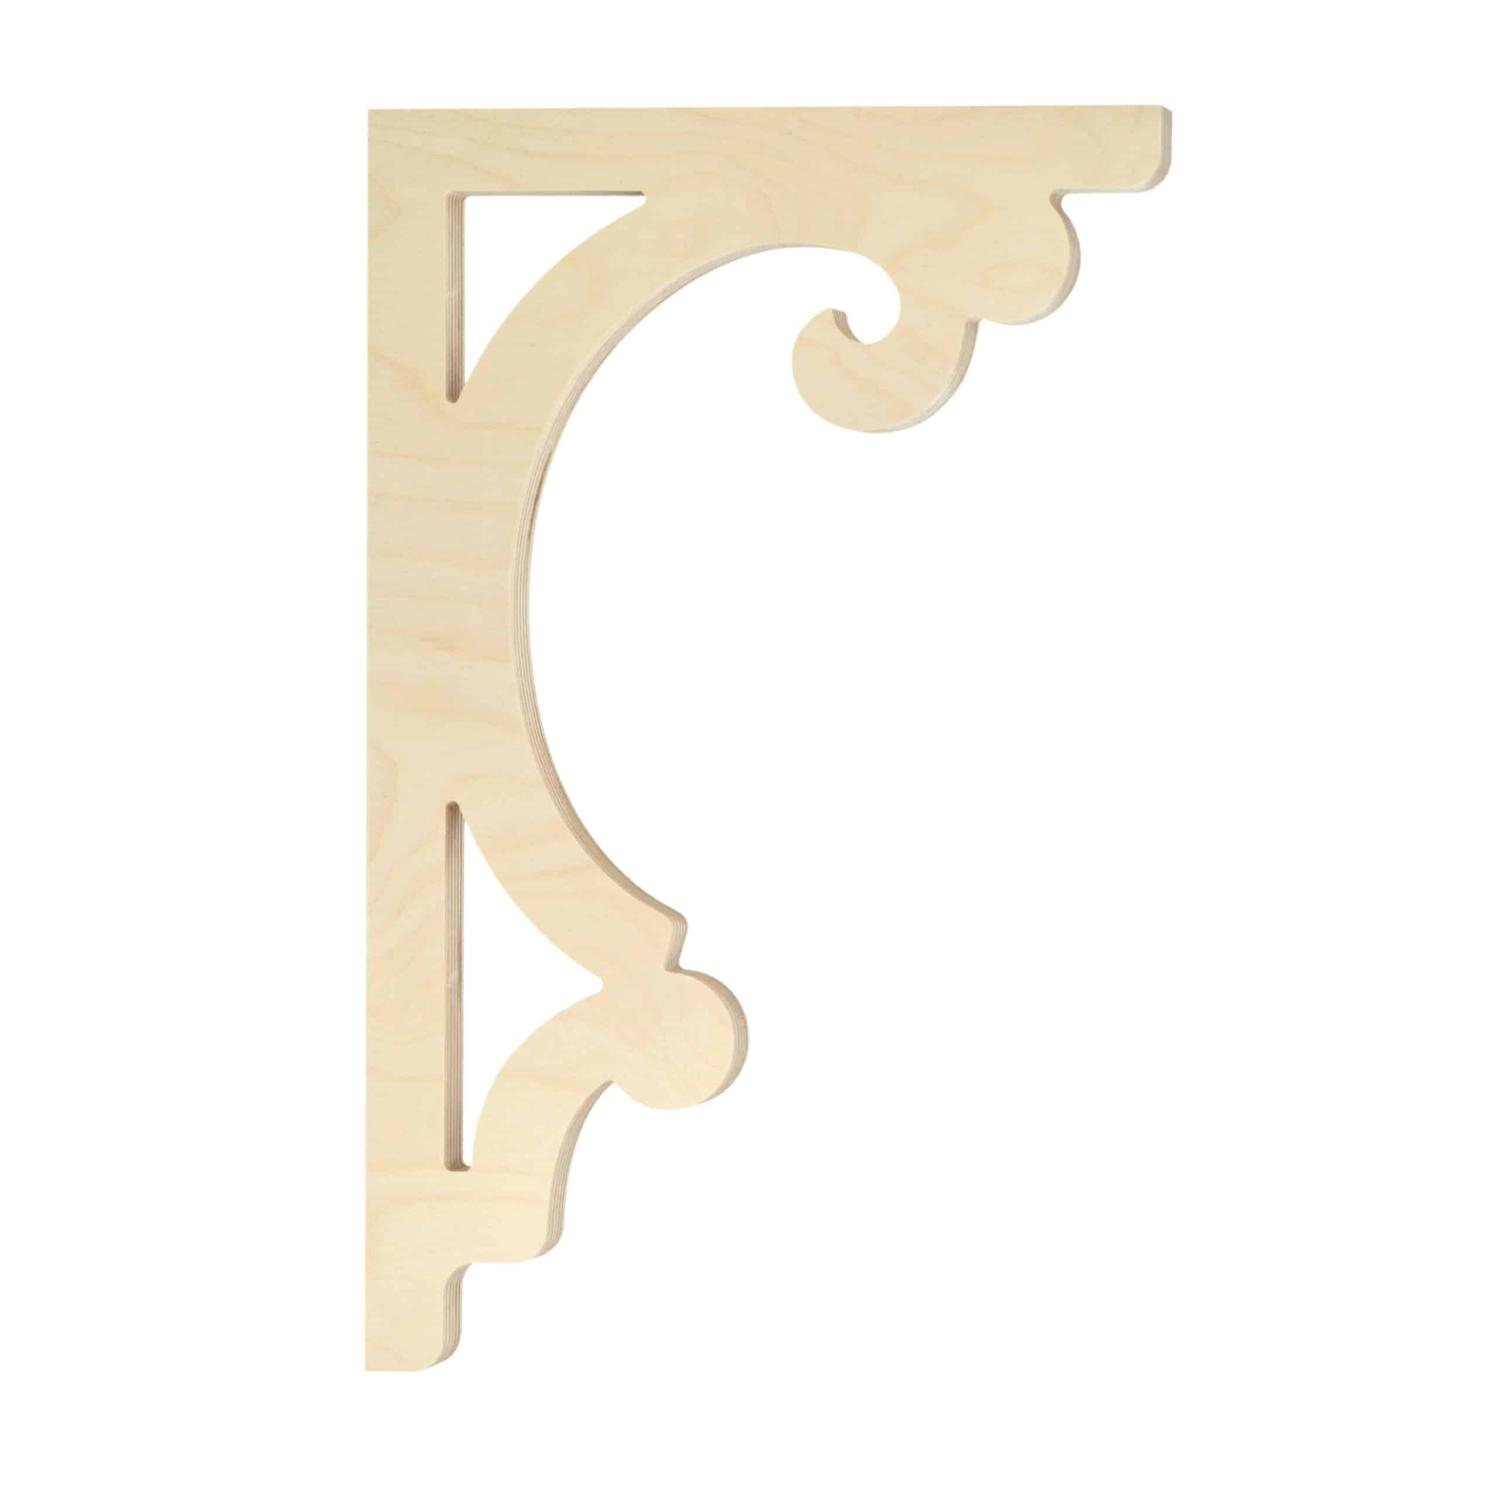 Bracket 022 - Classic wooden gingerbread corbel & bracket in Victorian style and with ornaments for porch, portico and veranda.